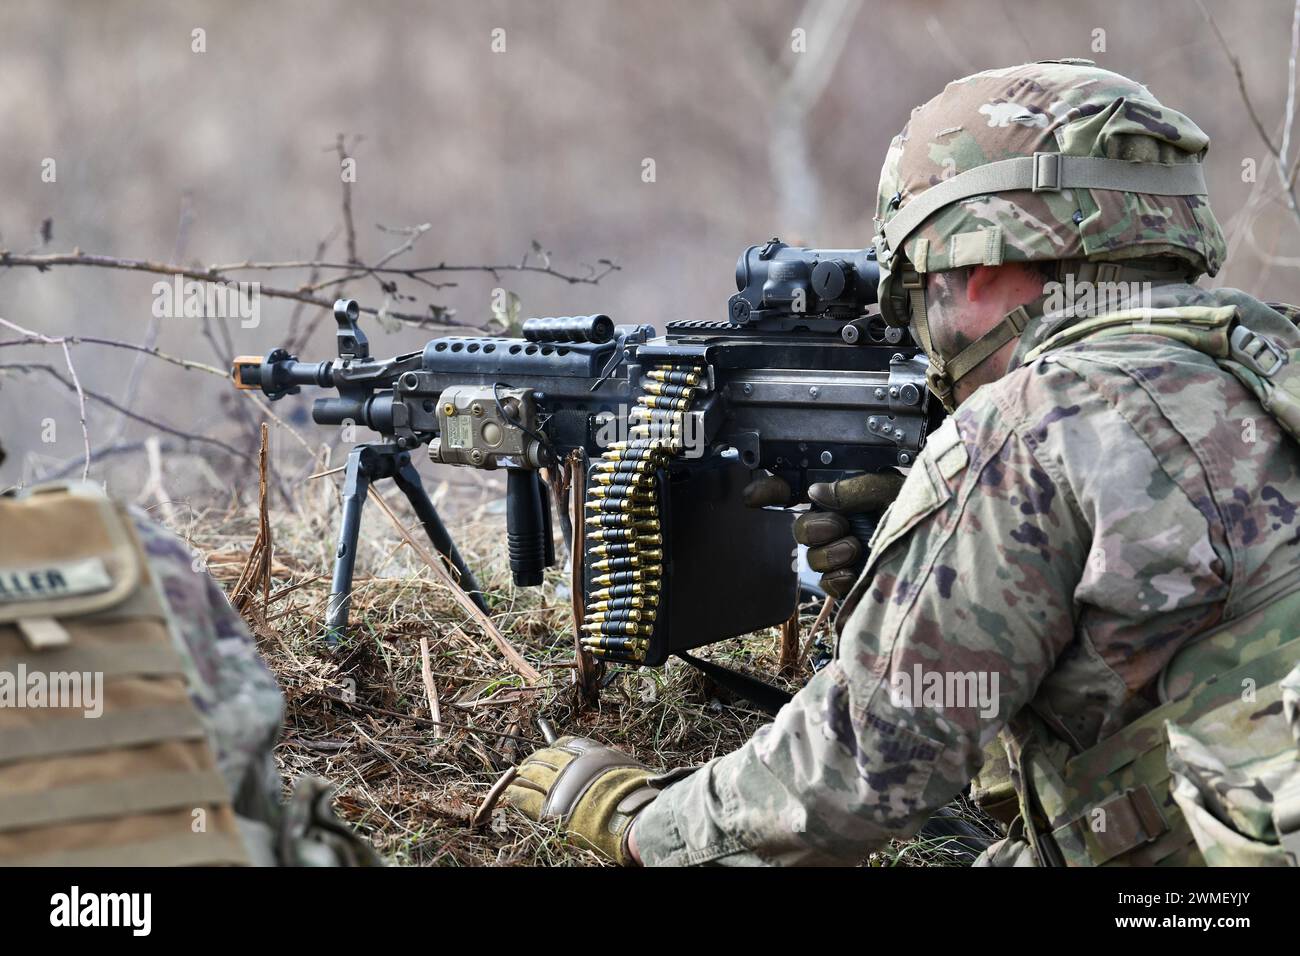 A U.S. Army Paratrooper assigned to the 1st Battalion, 503rd Infantry Regiment, 173rd Airborne Brigade, engages a target during team blank-fire and tactical movement training  as part of Eagle Ursa at the training range in Slunj, Croatia, Feb. 24, 2024. The 173rd Airborne Brigade is the U.S. Army's Contingency Response Force in Europe, providing rapidly deployable forces to the United States European, African, and Central Command areas of responsibility. Forward deployed across Italy and Germany, the brigade routinely trains alongside NATO allies and partners to build partnerships and strength Stock Photo